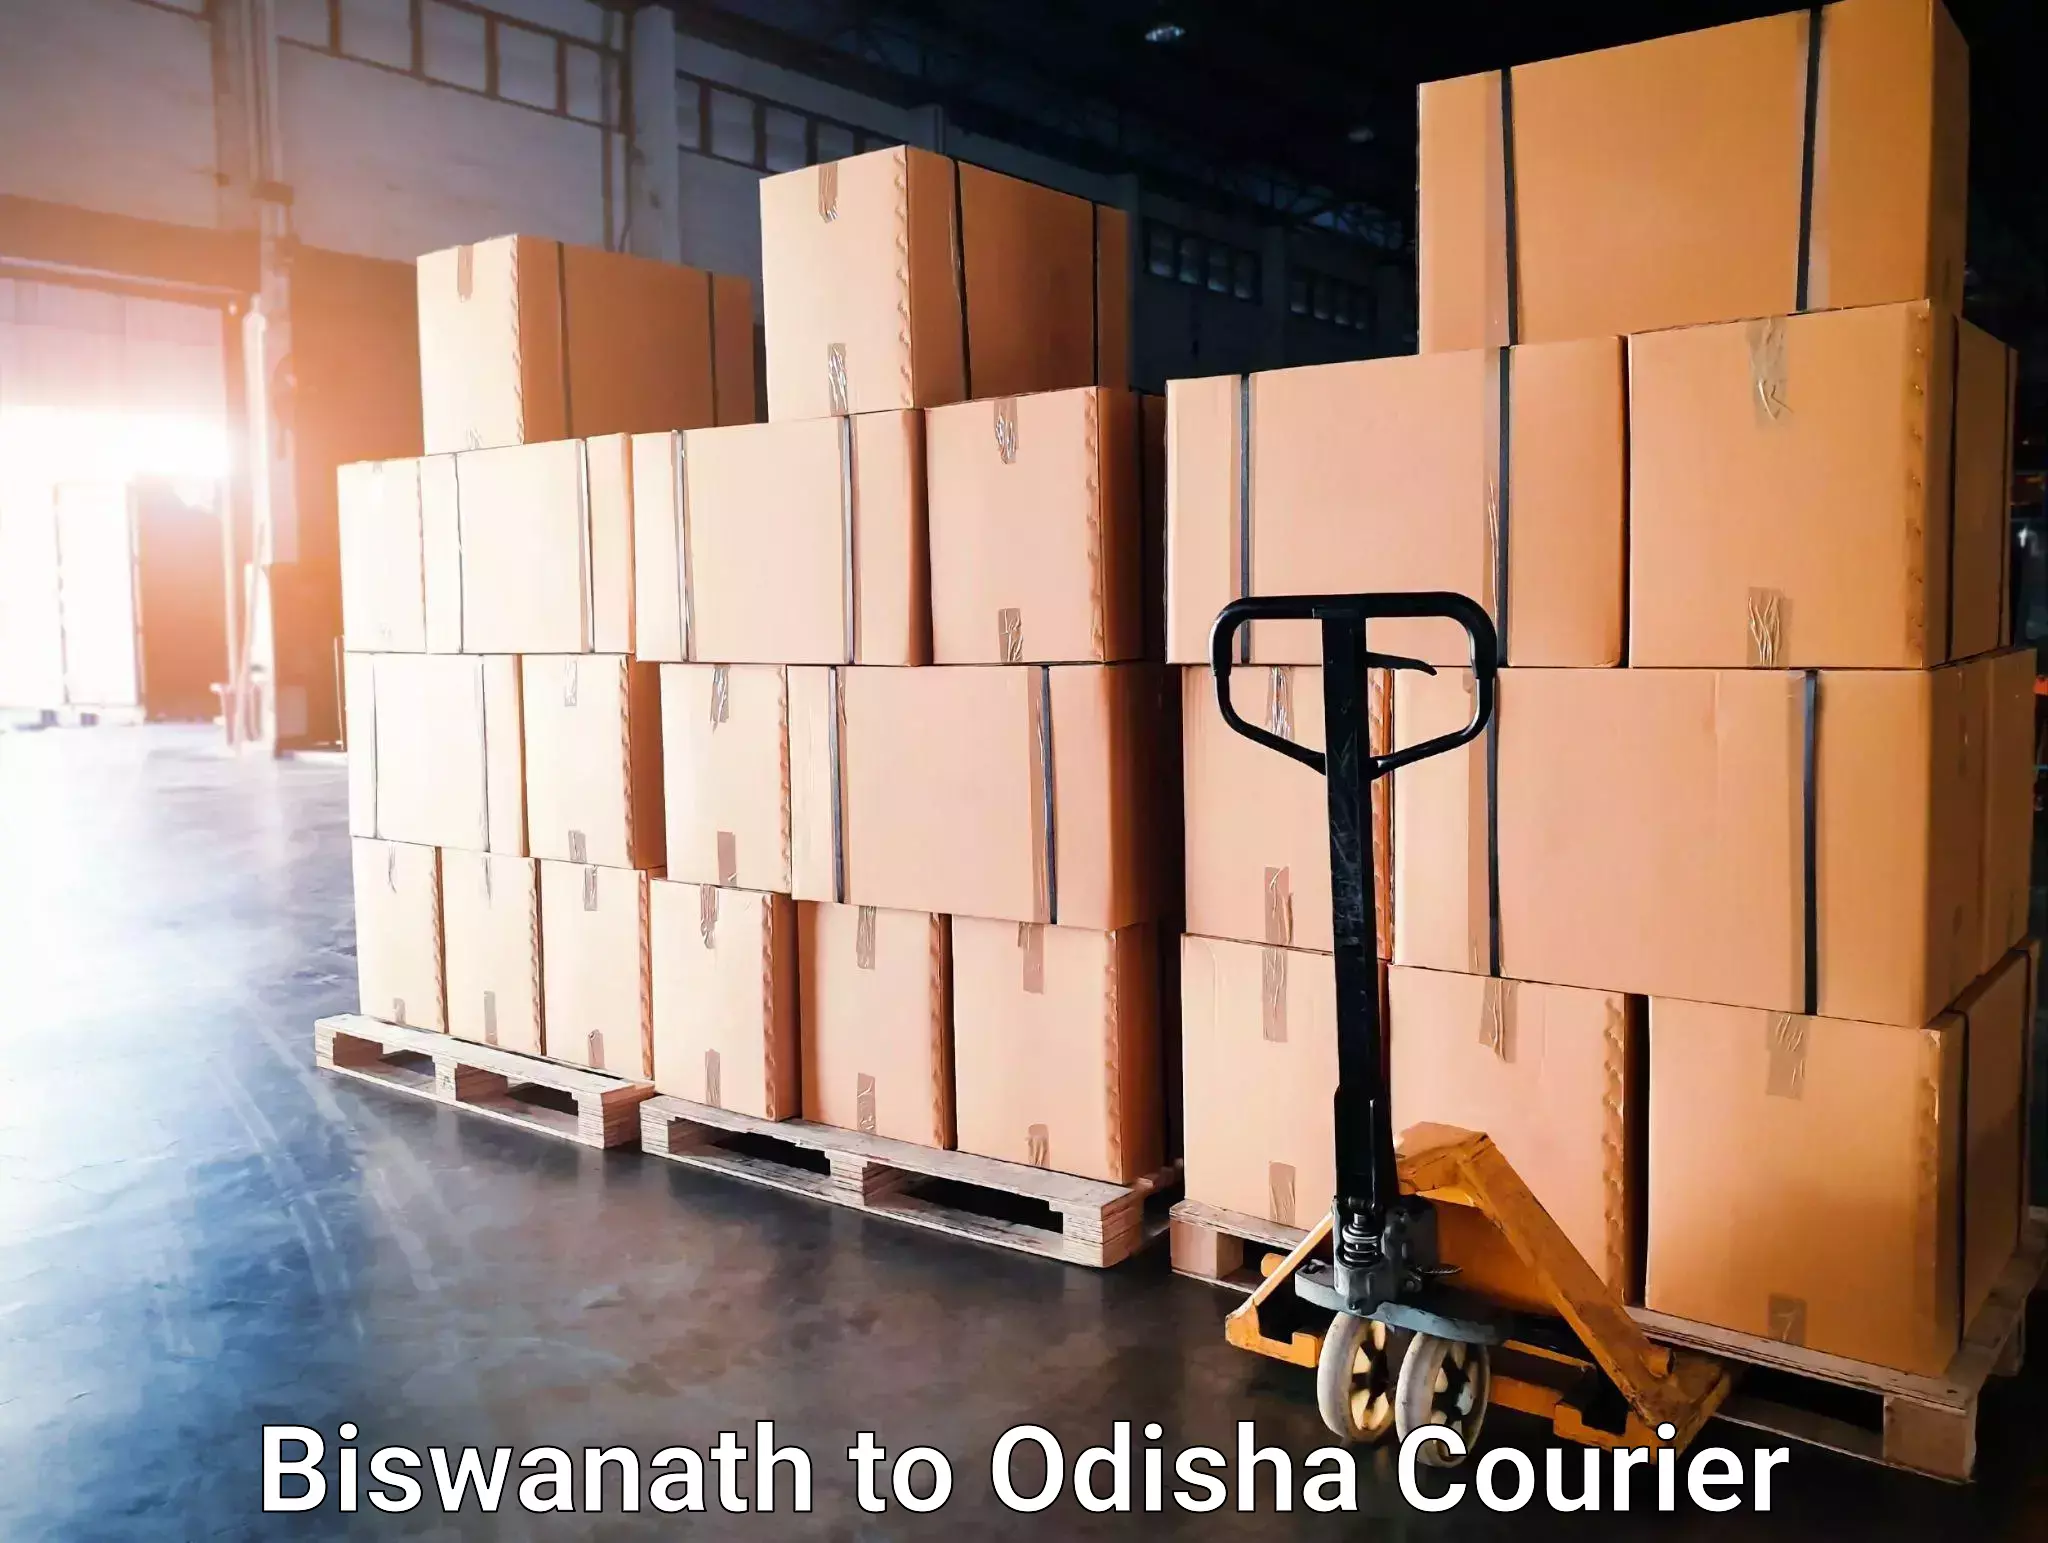 Courier service partnerships Biswanath to Puri